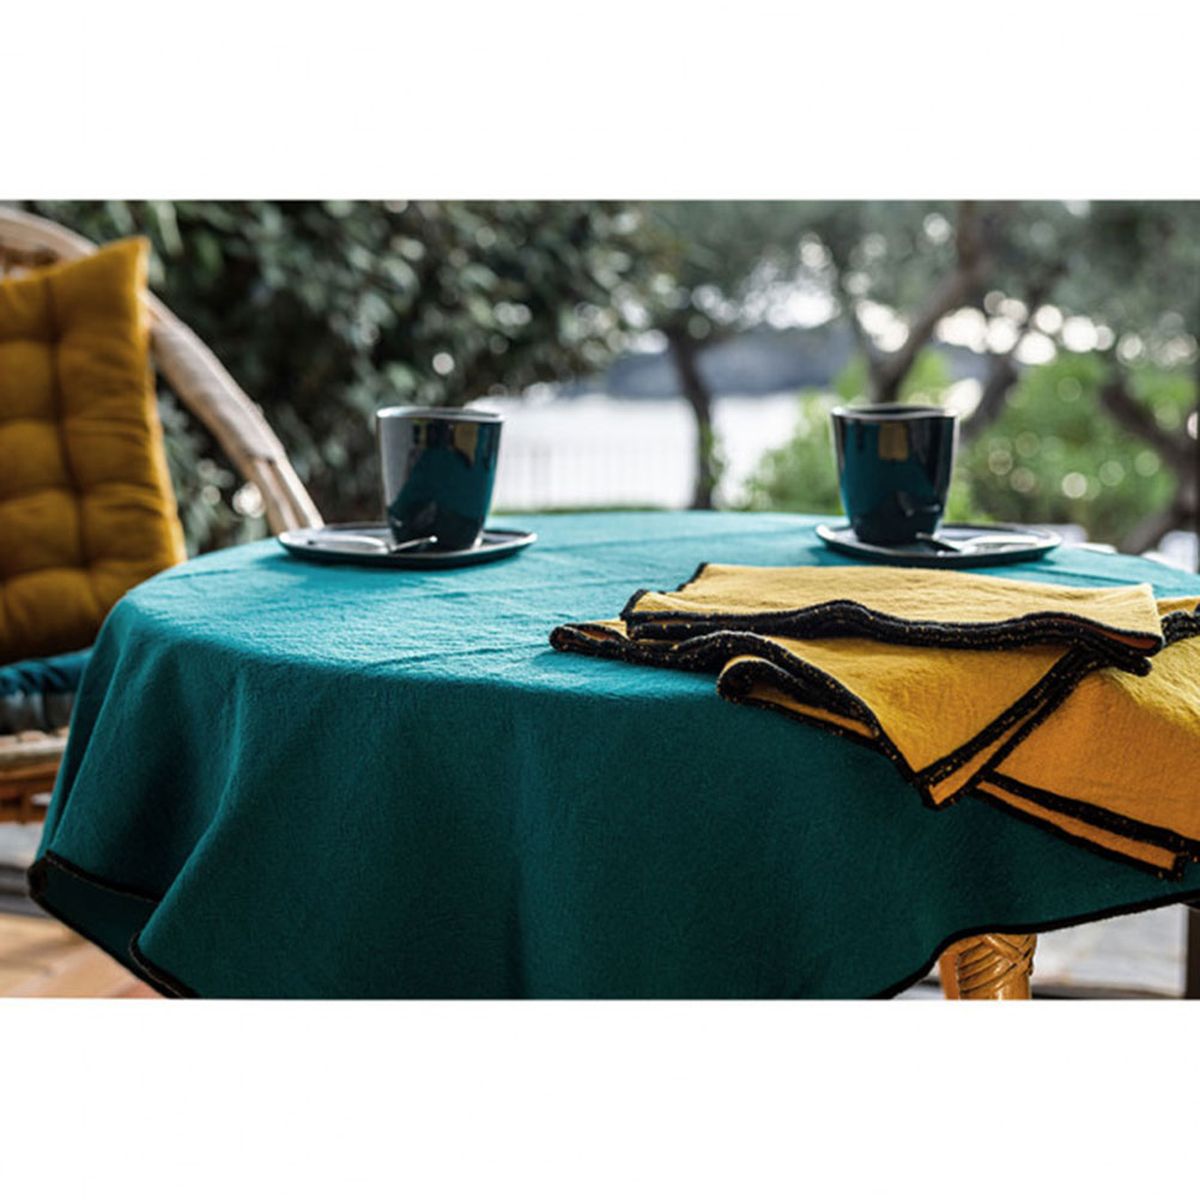 Washed dyed cotton tablecloth